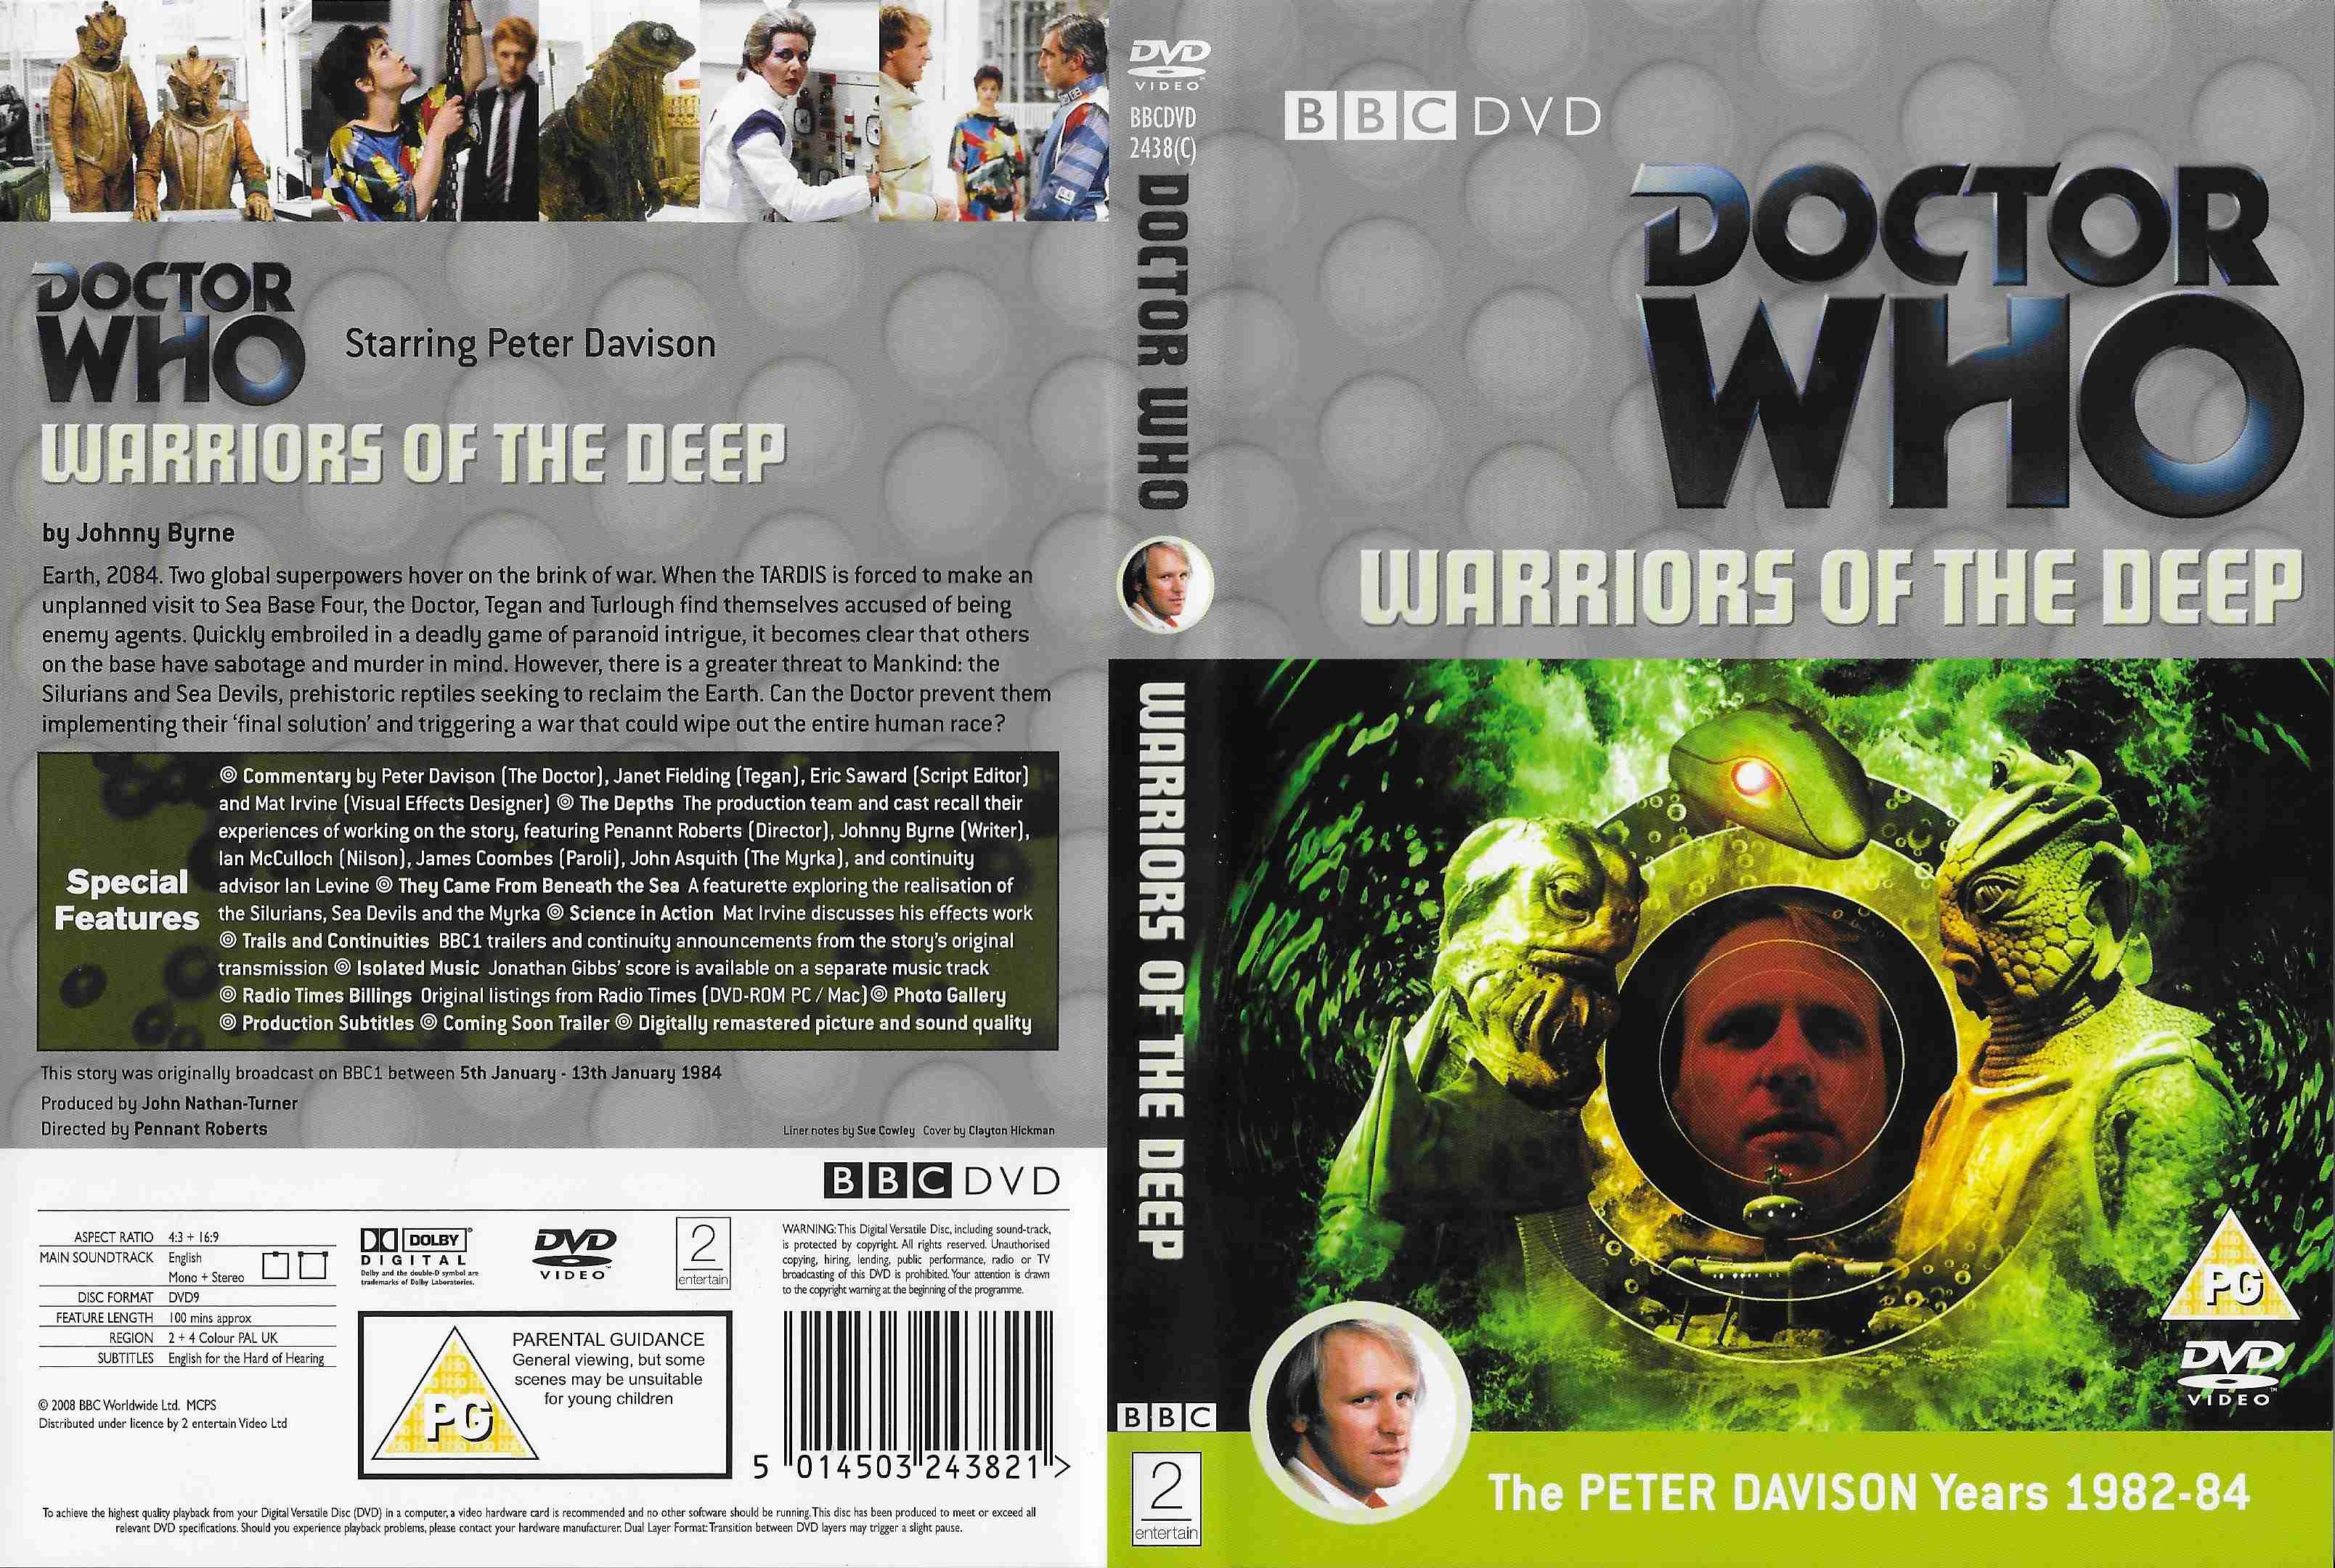 Picture of BBCDVD 2438C Doctor Who - Warriors of the deep by artist Johnny Byrne from the BBC records and Tapes library